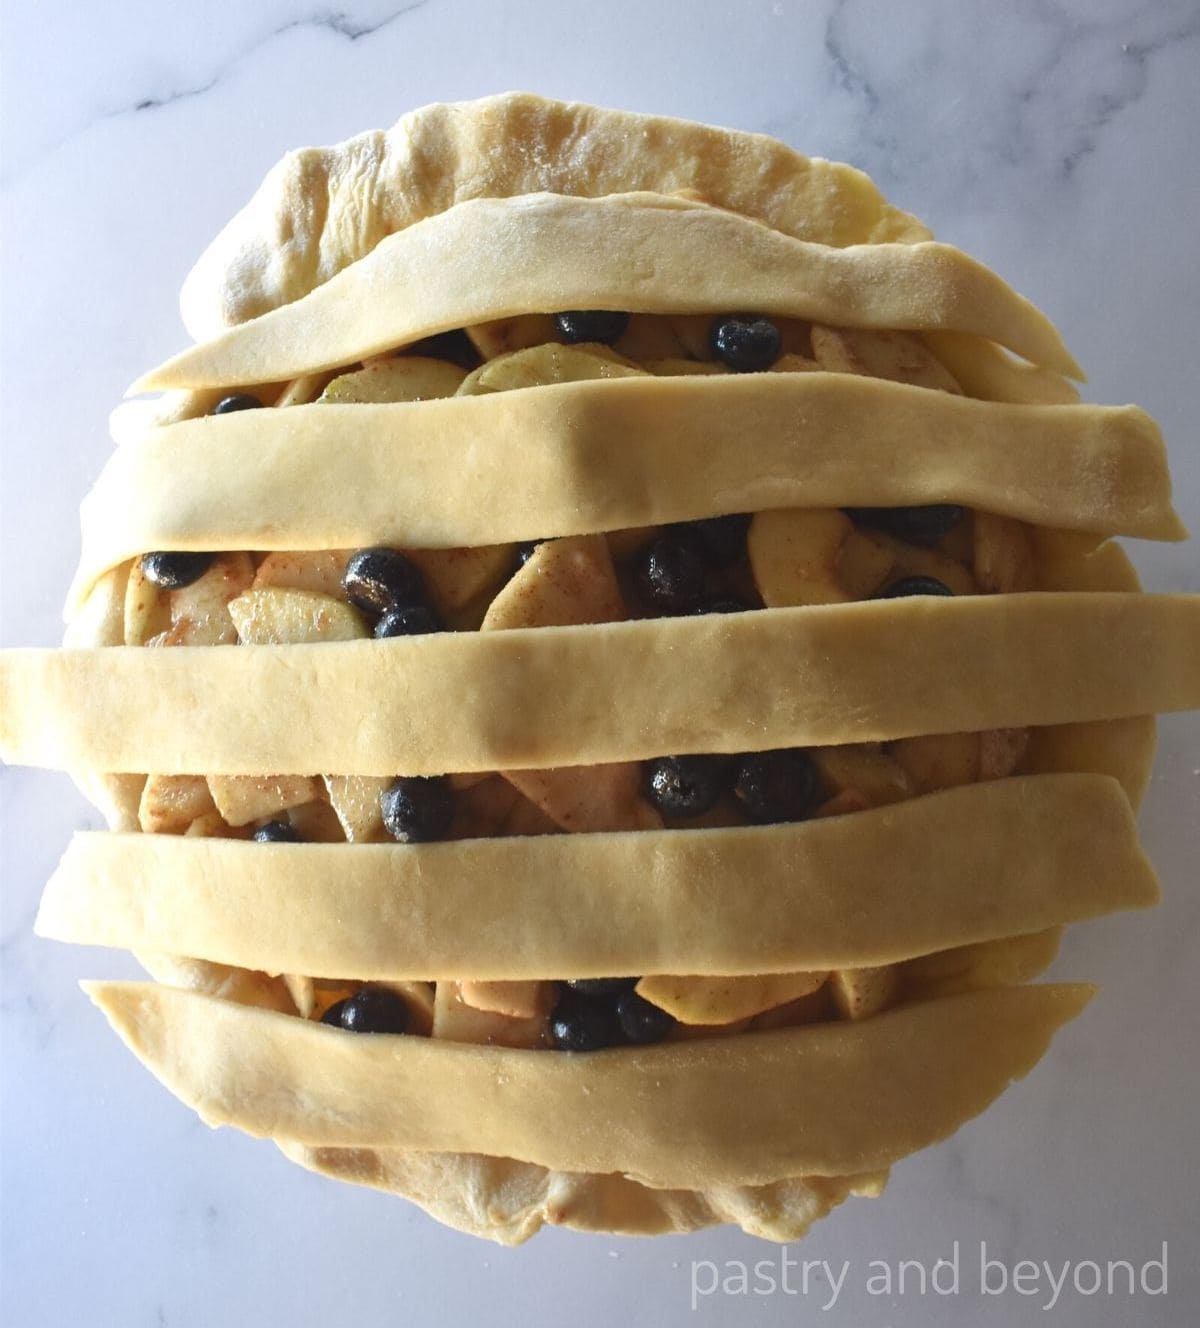 Placing five strips horizontally on top of the pie.